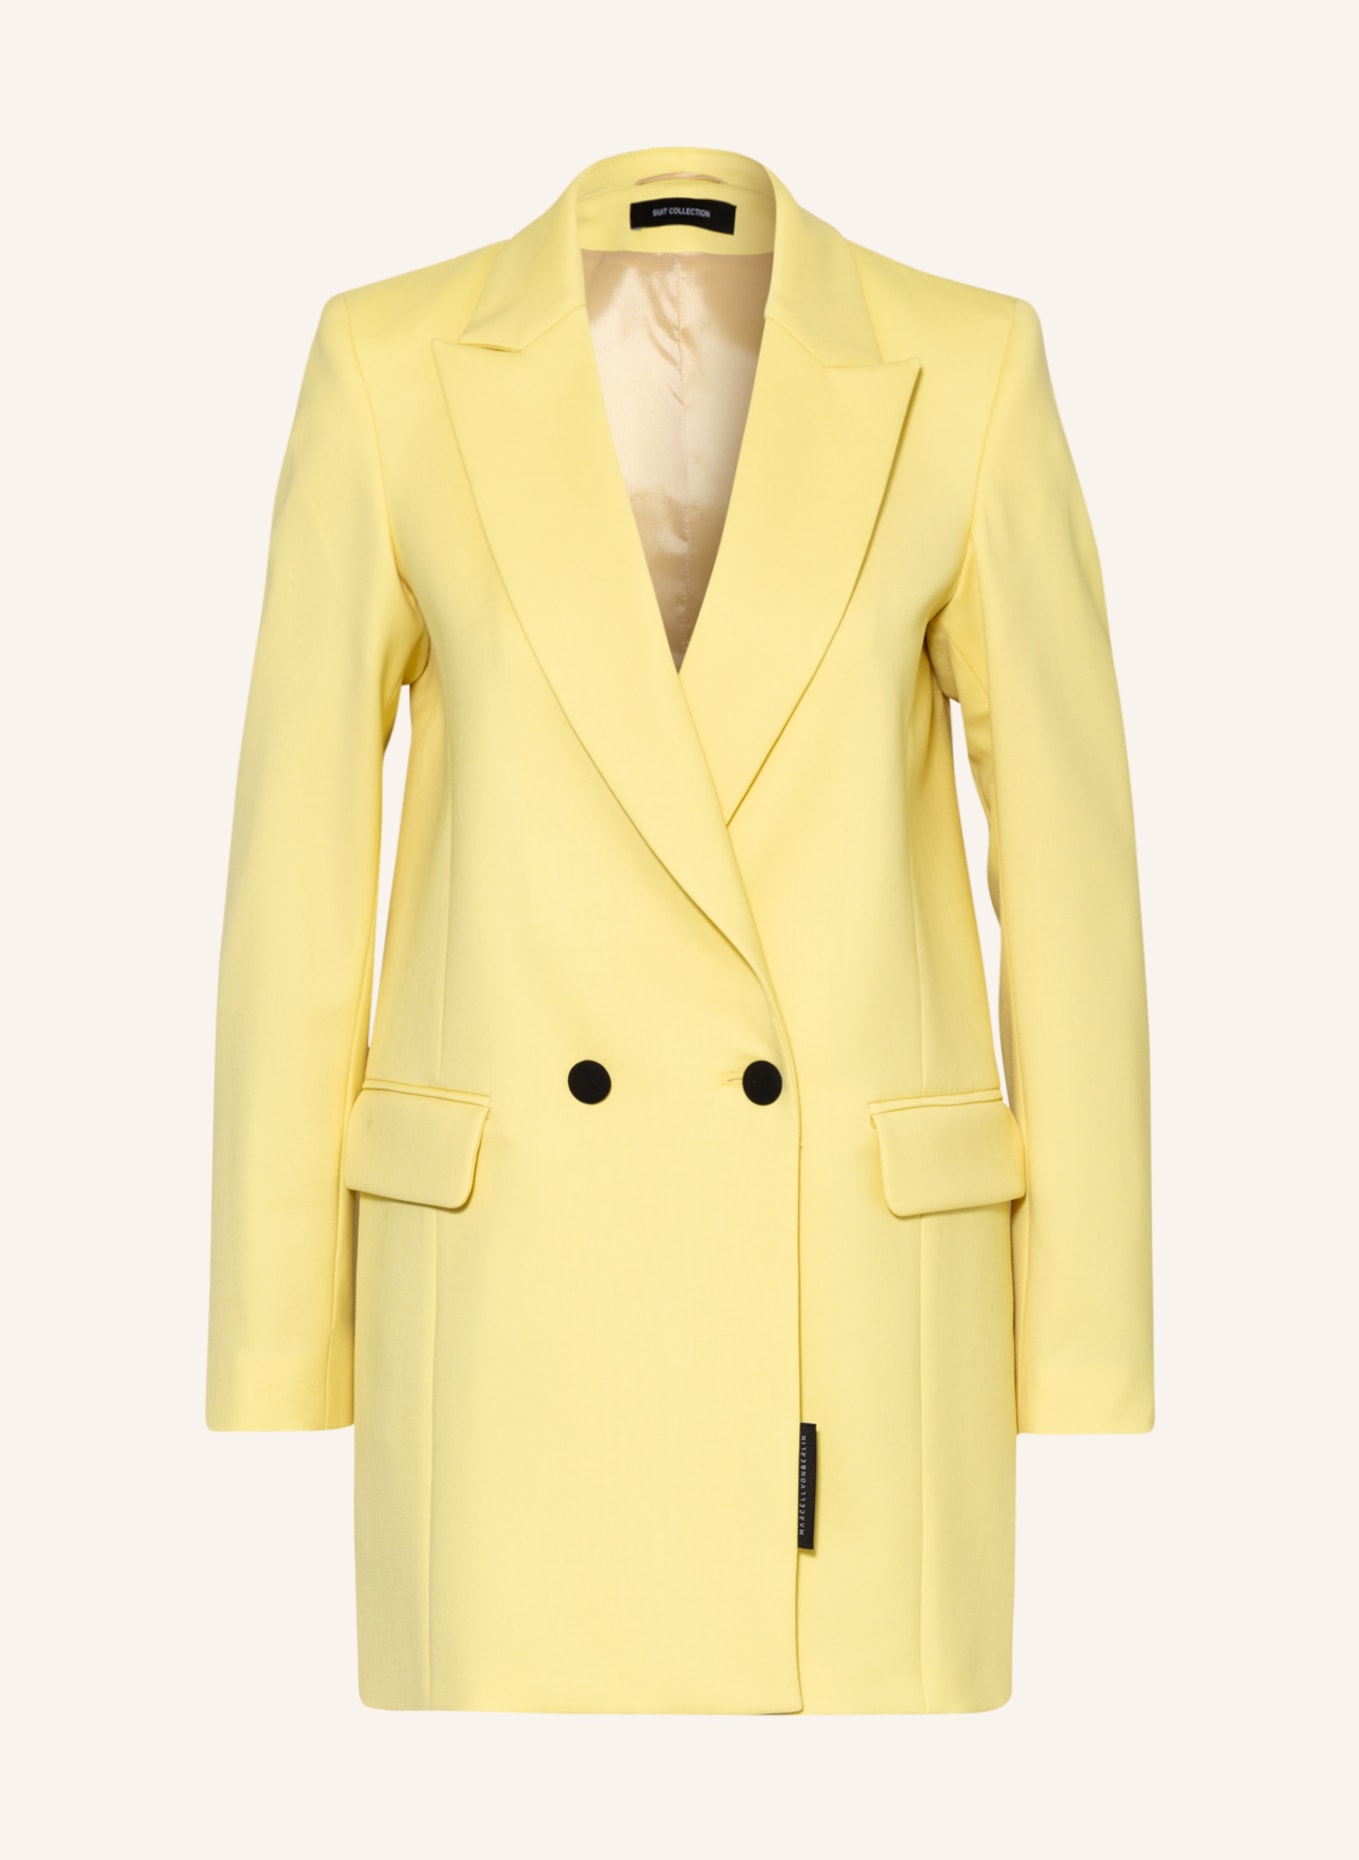 MARCELL VON BERLIN Oversized blazer, Color: YELLOW (Image 1)